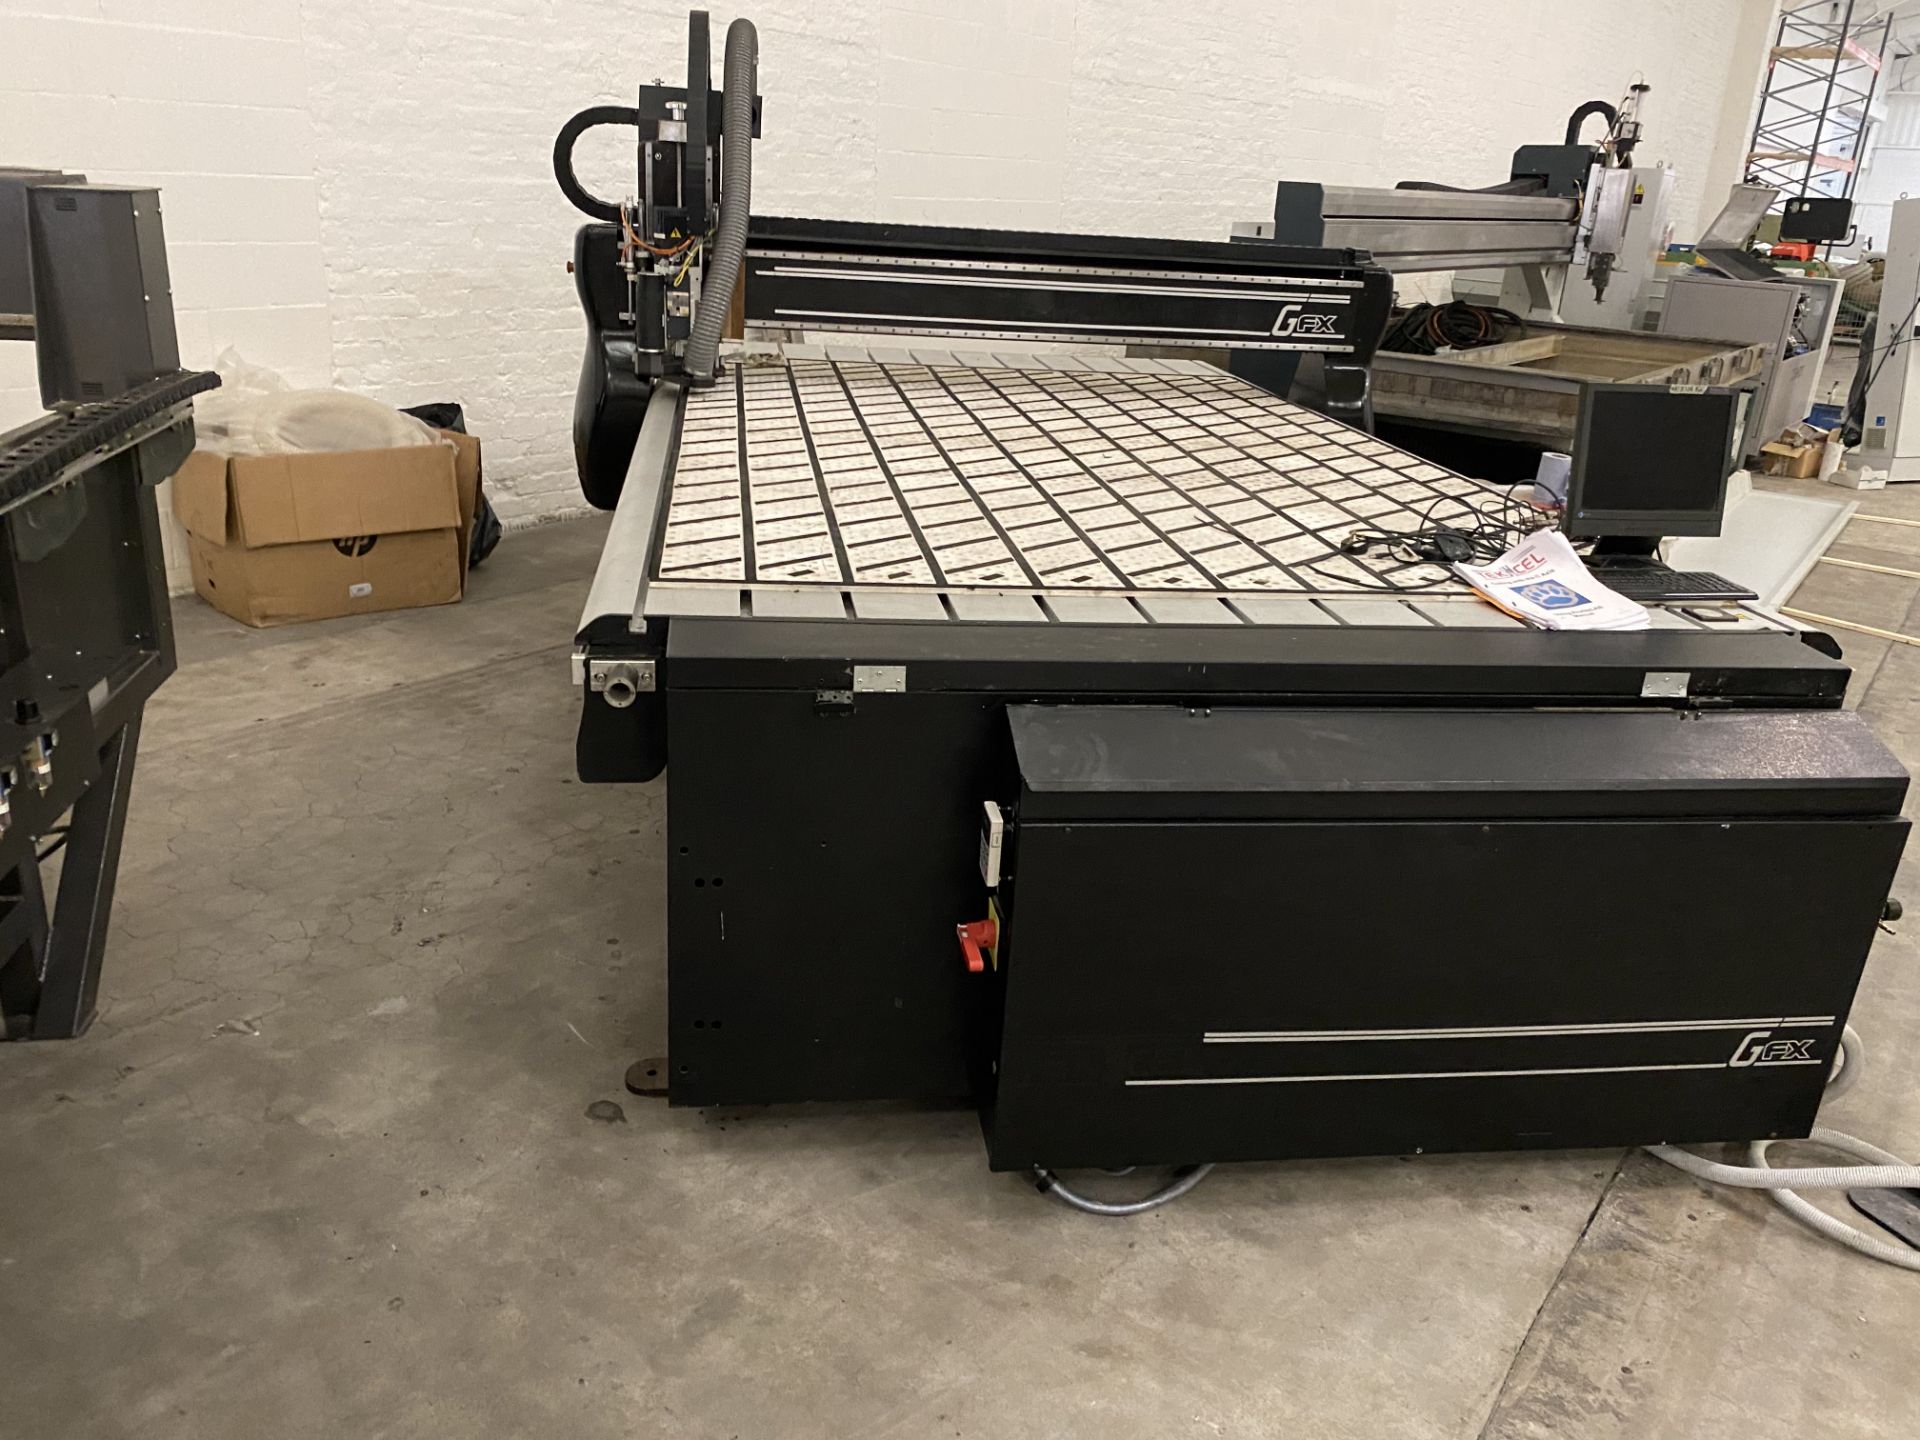 GFX CNC Router, with automatic tool changer, 9kW s - Image 7 of 16